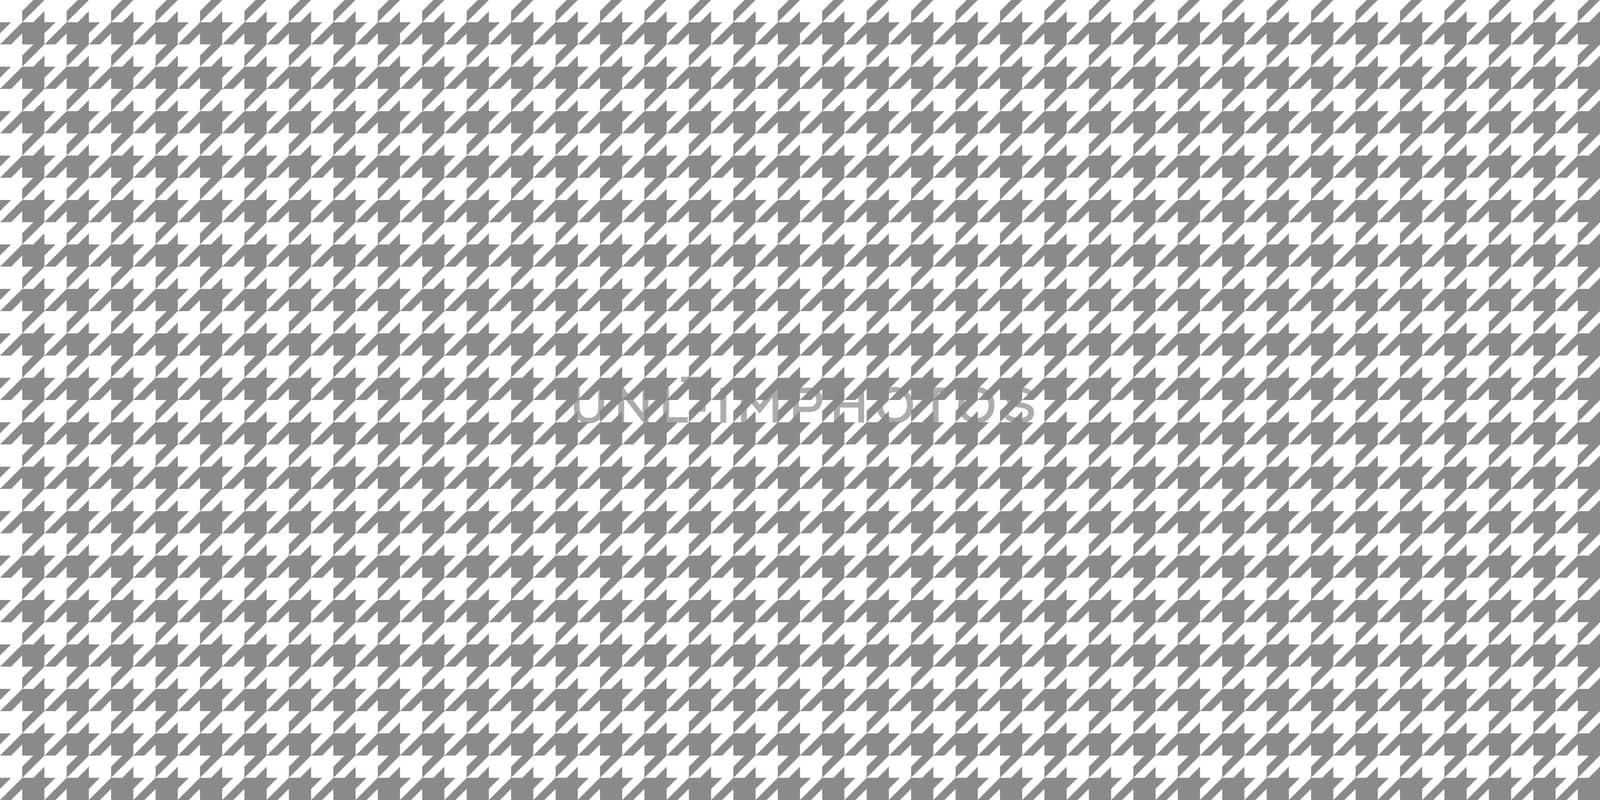 Grey Seamless Houndstooth Pattern Background. Traditional Arab Texture. Fabric Textile Material.